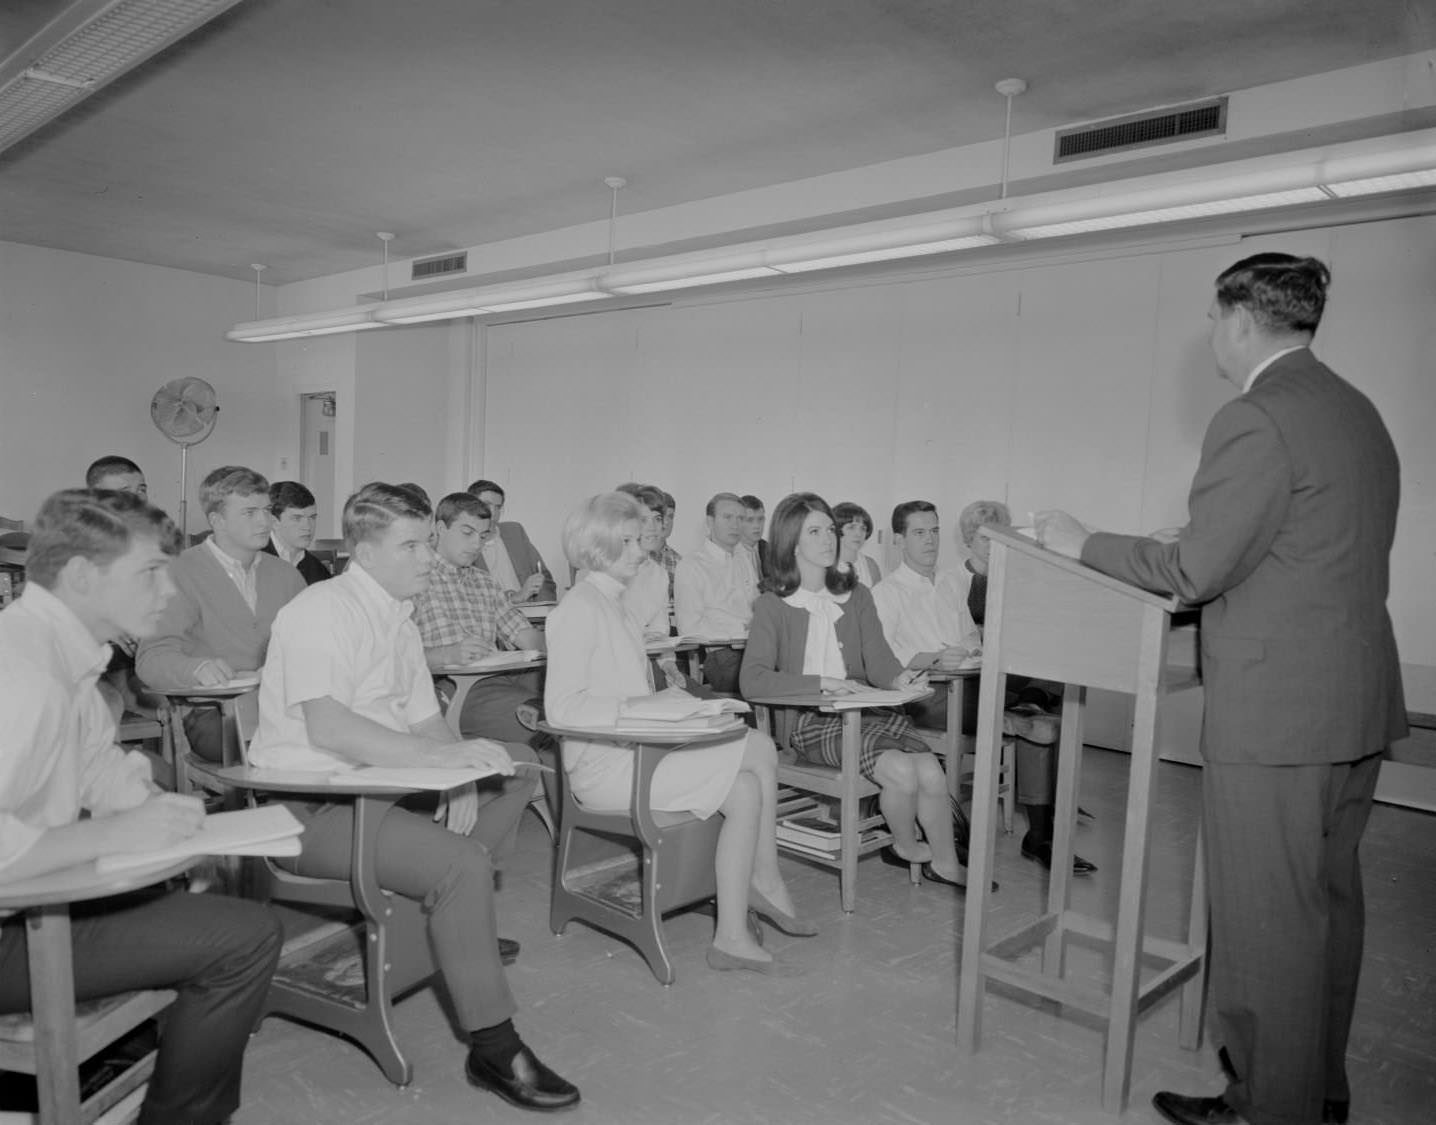 Students sit in desks looking at a man, presumably a lecturer, who is standing behind a wooden podium and speaking in an unknown room at St. Edwards University, 1966